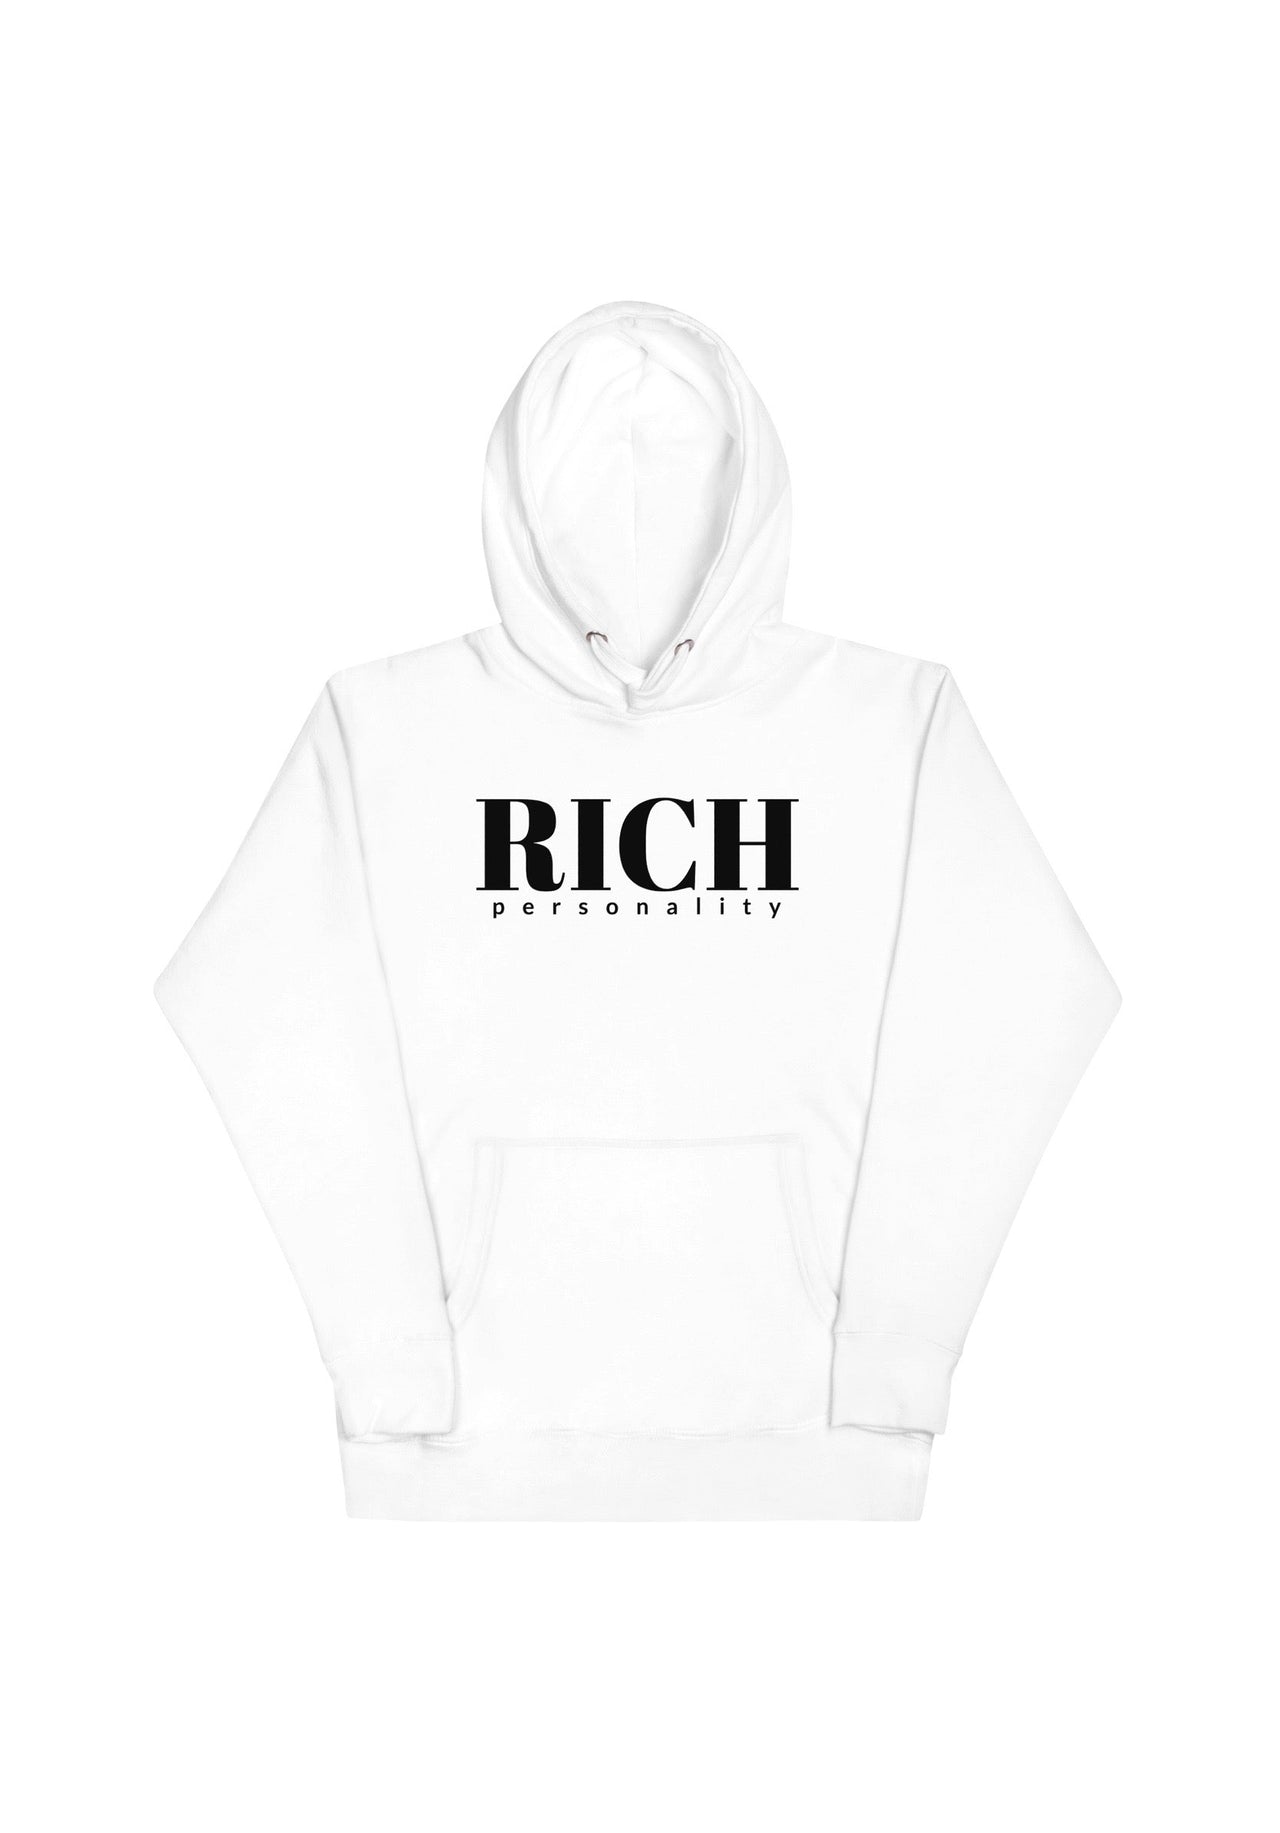 RICH PERSONALITY Hoodie